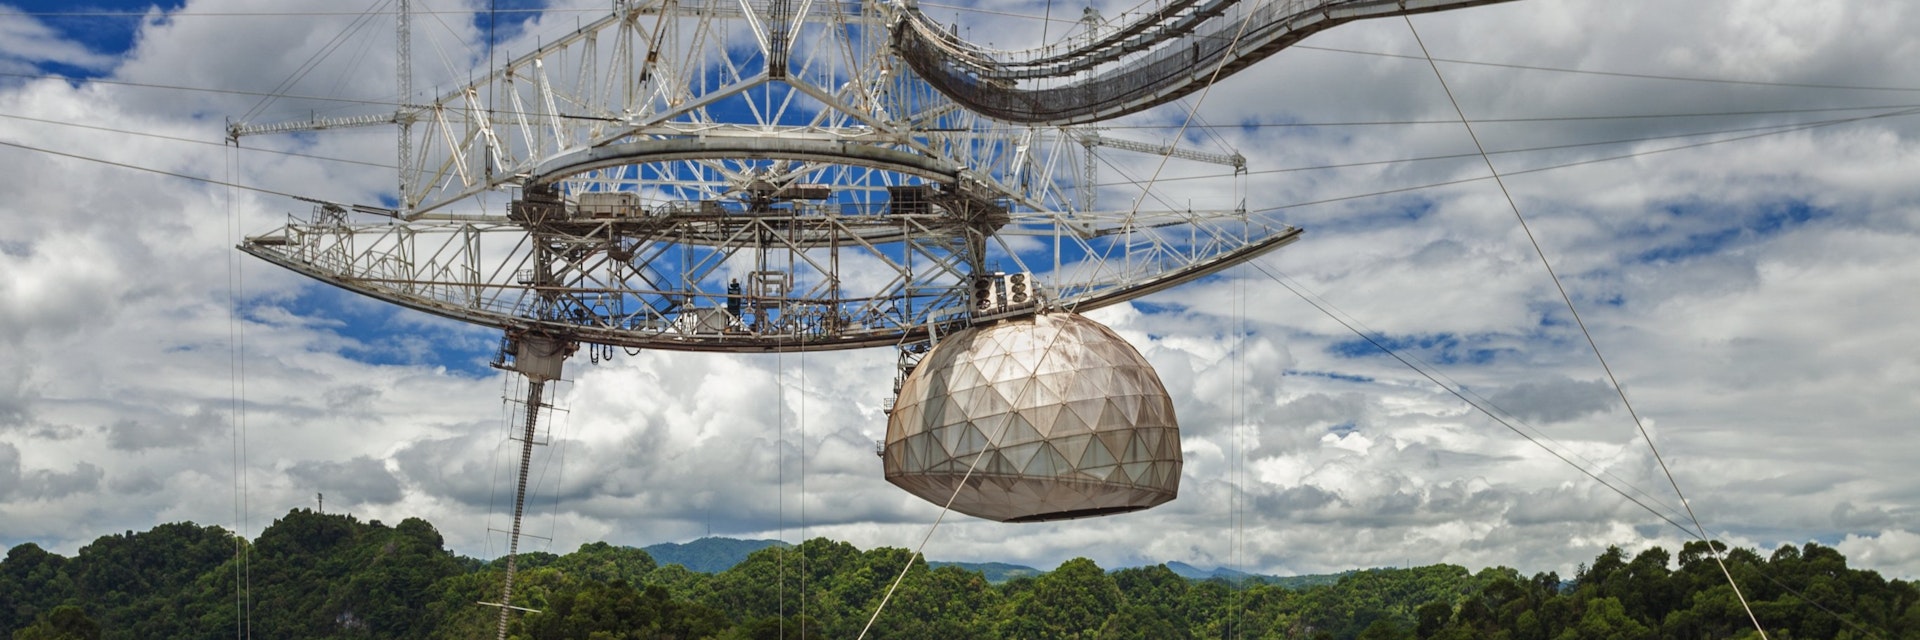 Worlds largest single-dish radio telescope, the Arecibo Observatory, Arecibo, Puerto Rico. (Photo by: Universal Images Group via Getty Images)